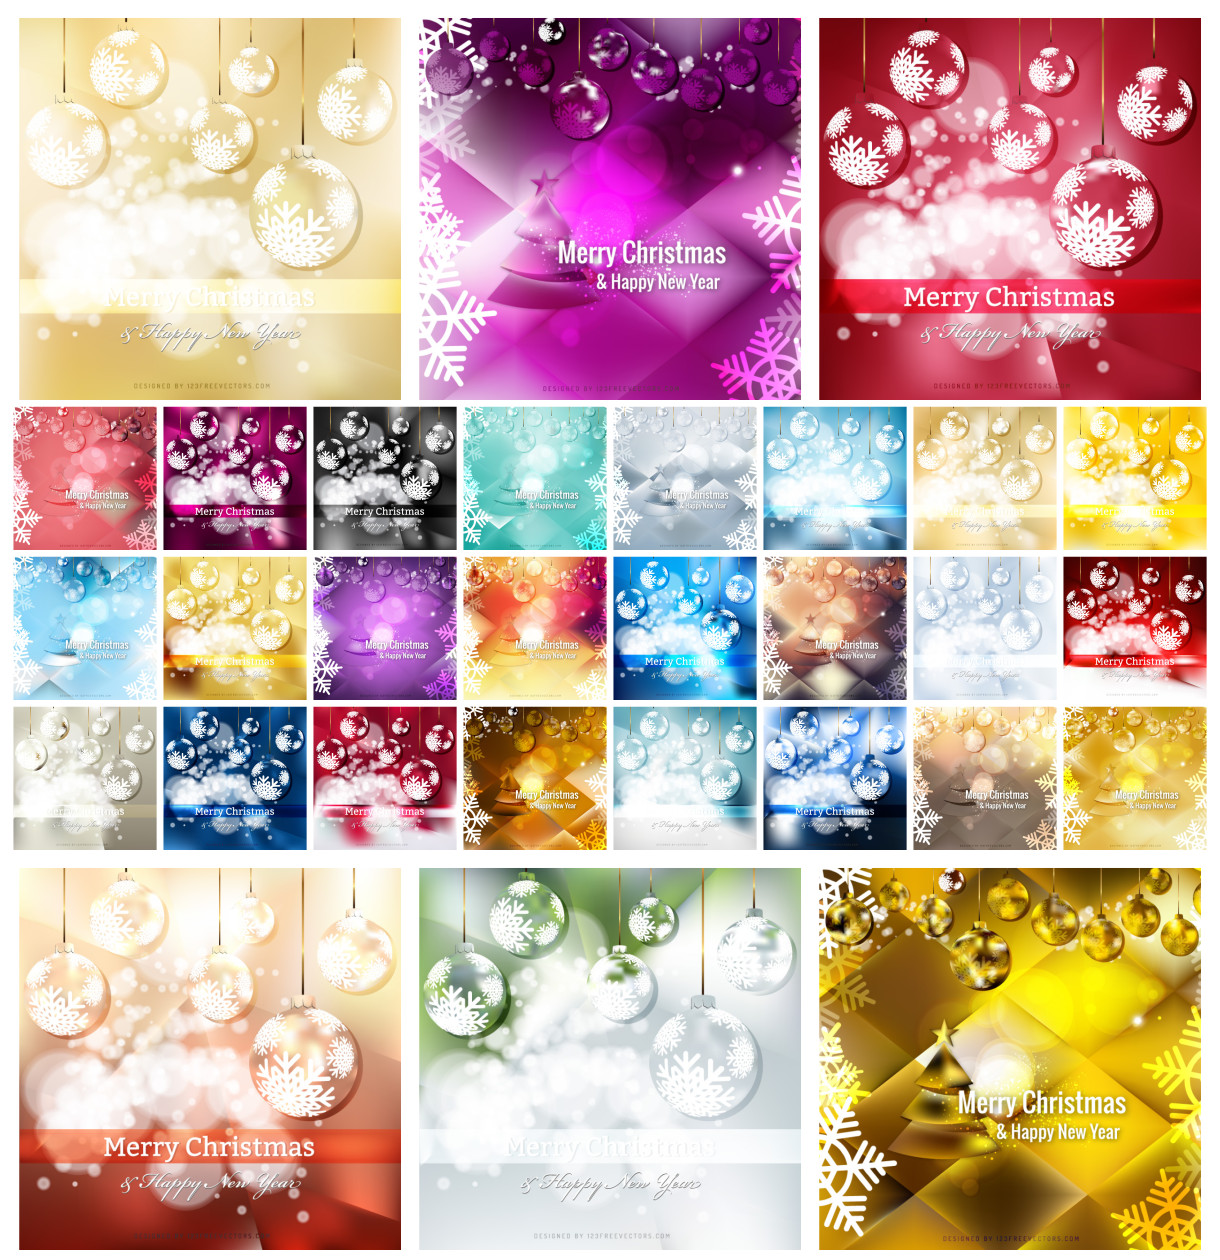 Deck the Screens: 30 Vibrant Christmas Balls Backgrounds for Your Winter Design Projects